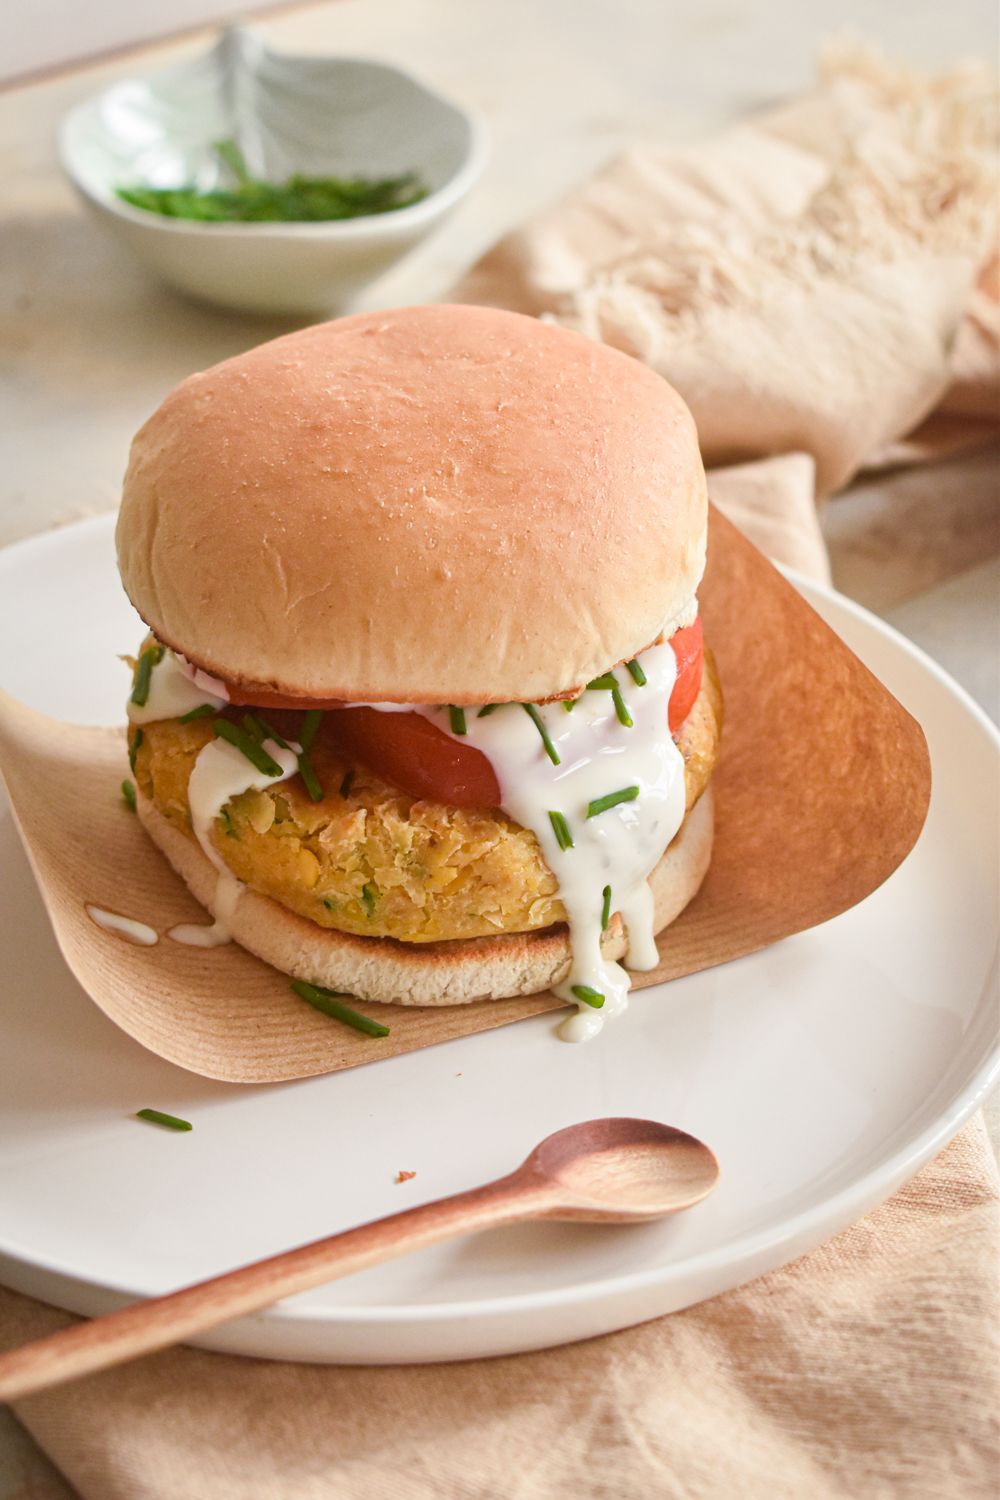 Vegetarian chickpea burgers with ranch dressing on a white roll with tomatoes, lettuce, and drizzled ranch dressing.